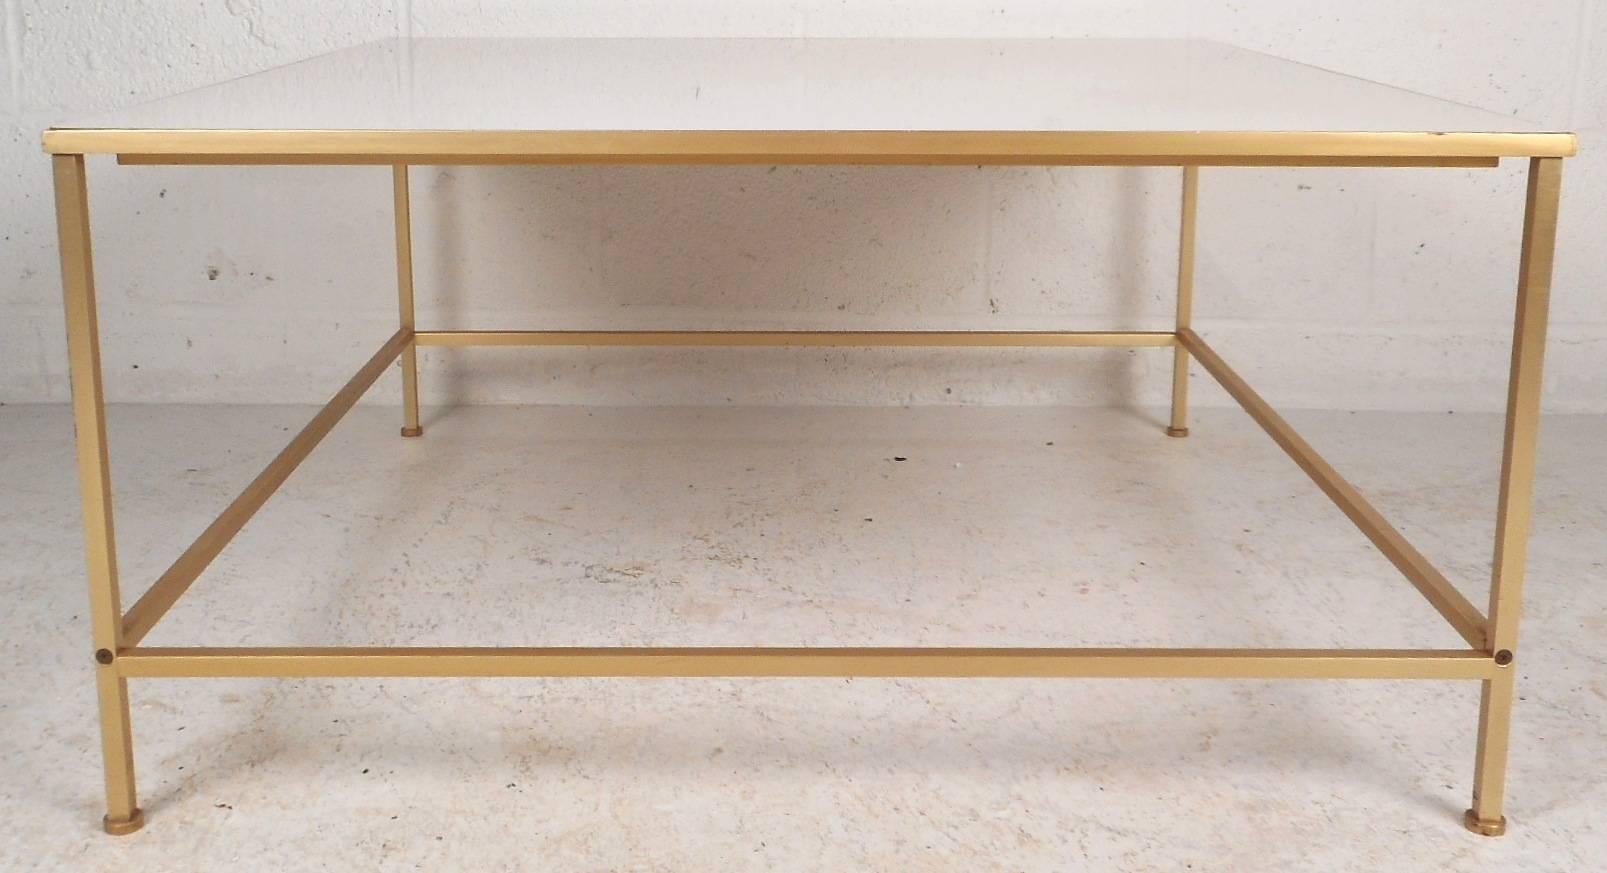 This beautiful vintage modern coffee table features a brass frame with stretchers between each leg. Elegant white laminate tabletop ensures a sturdy and stylish place to set any type of item. Mid-Century piece with an excellent straight line design